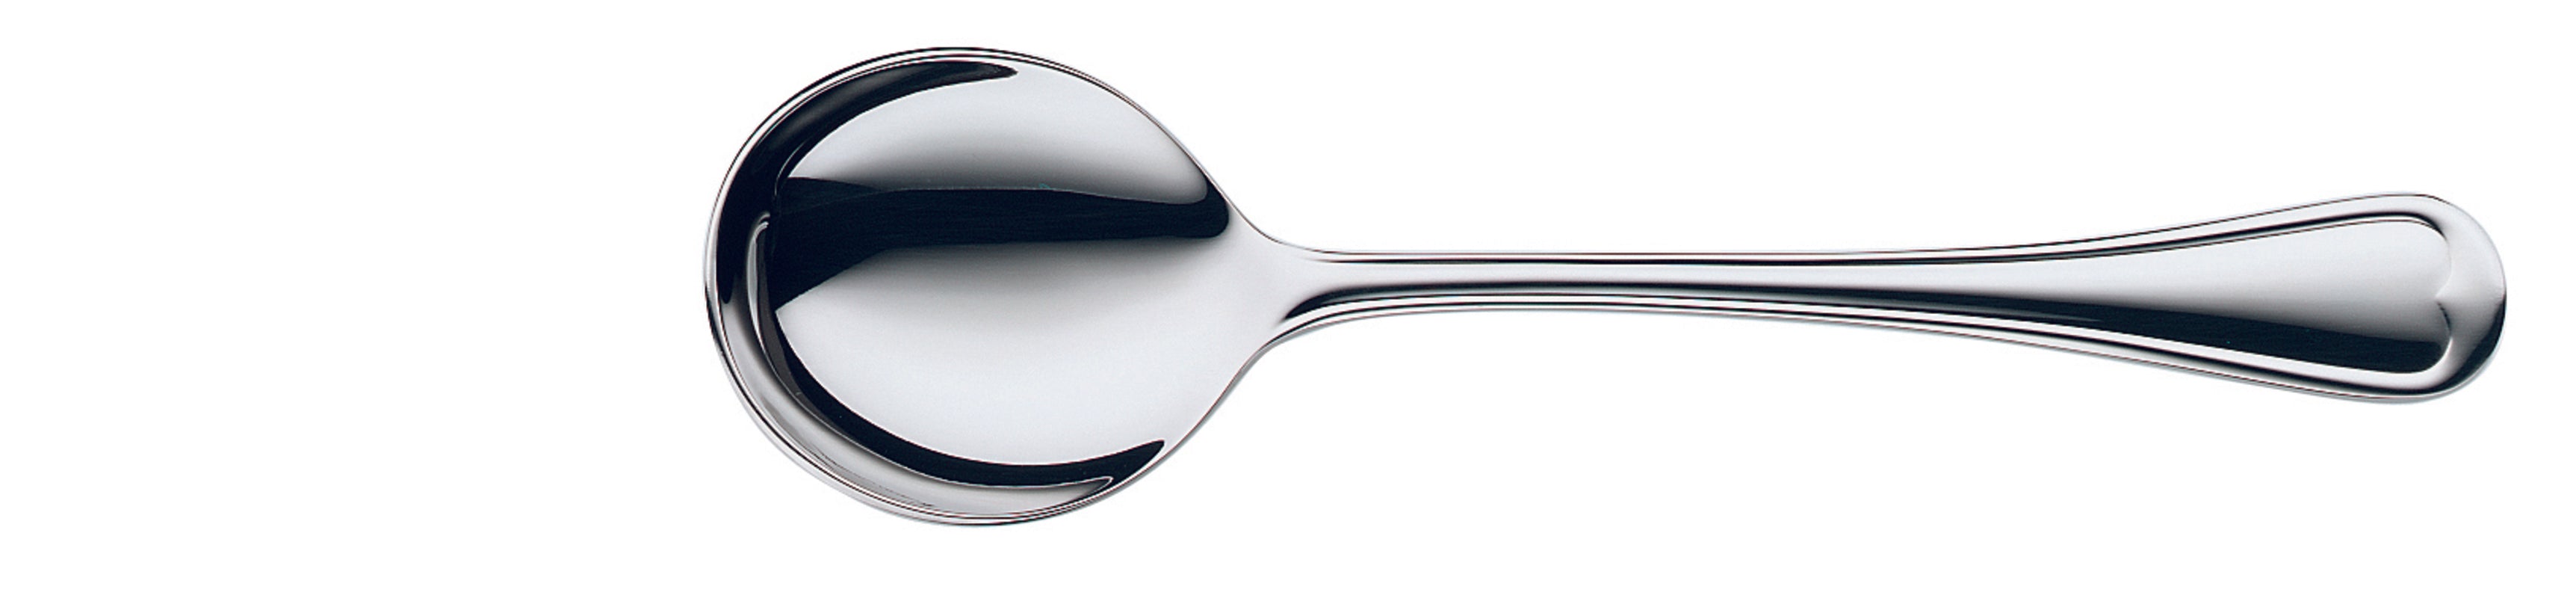 Round Soup Spoon 6.5